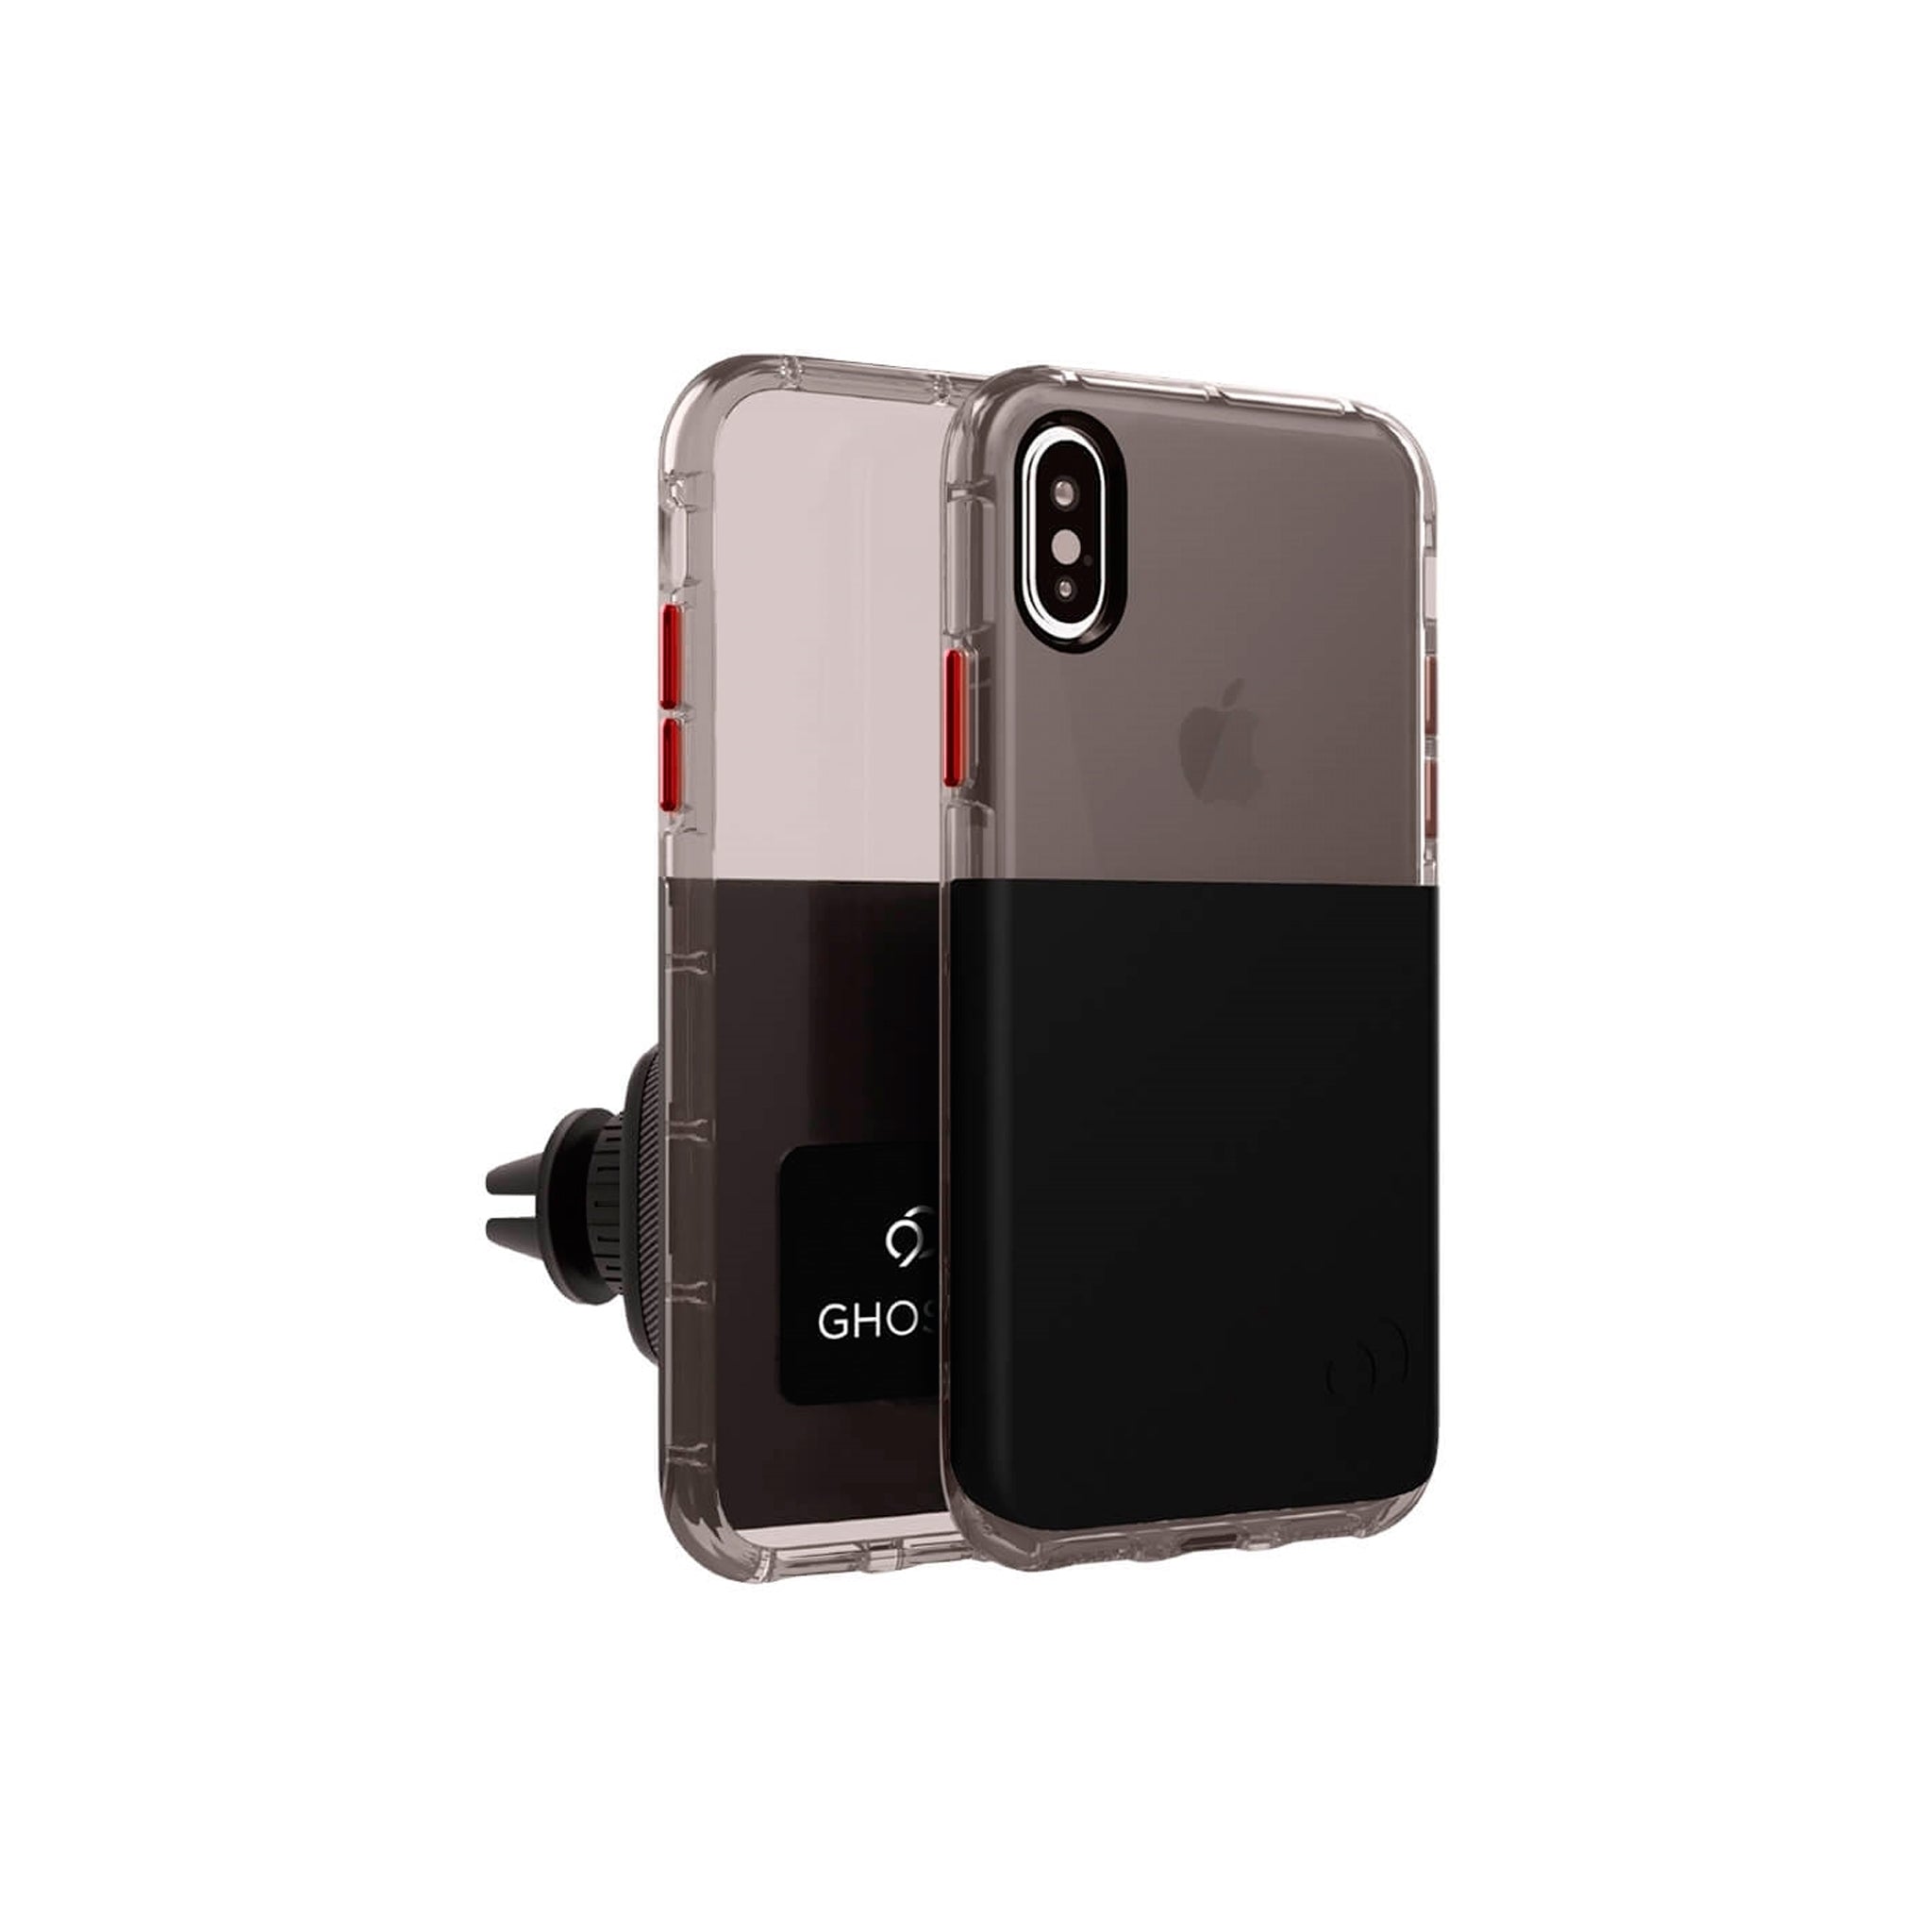 Nimbus9 - Ghost 2 Case With Mount For Apple Iphone Xs / X - Black